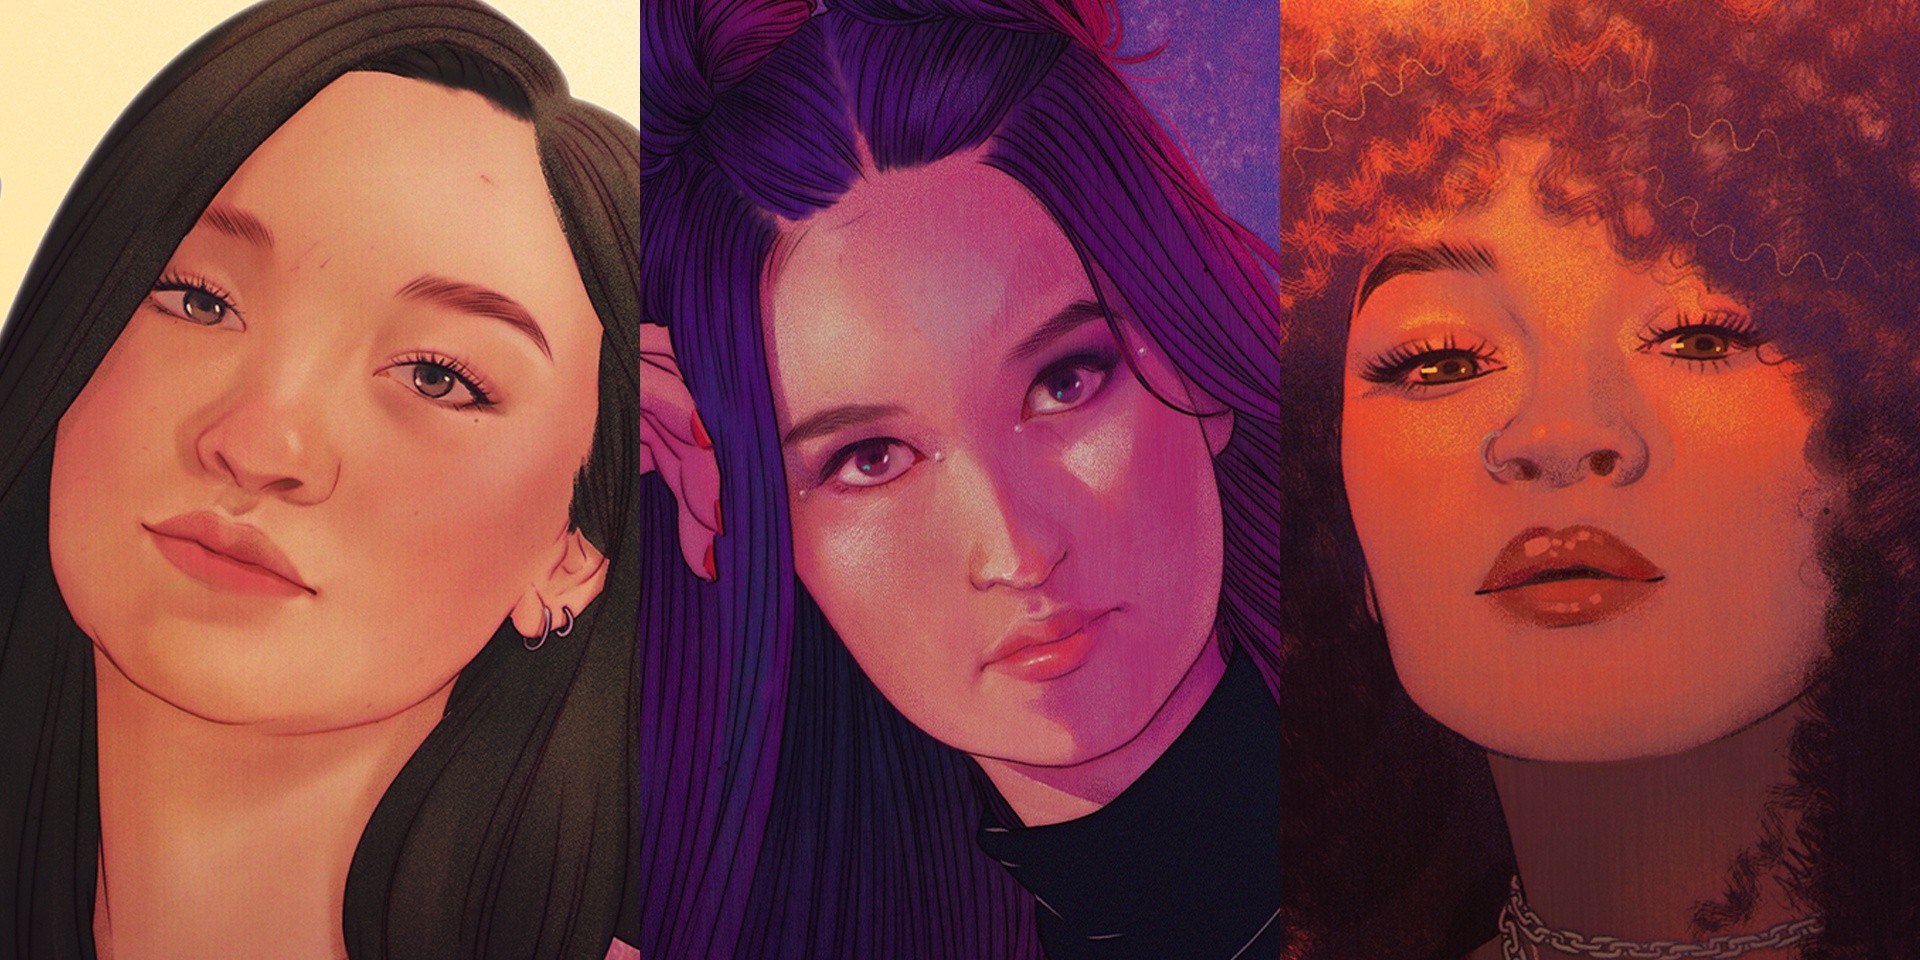 mxmtoon, Stephanie Poetri, Wolftyla to share the experiences of Asian women in ILLUMINATED webcomic series 